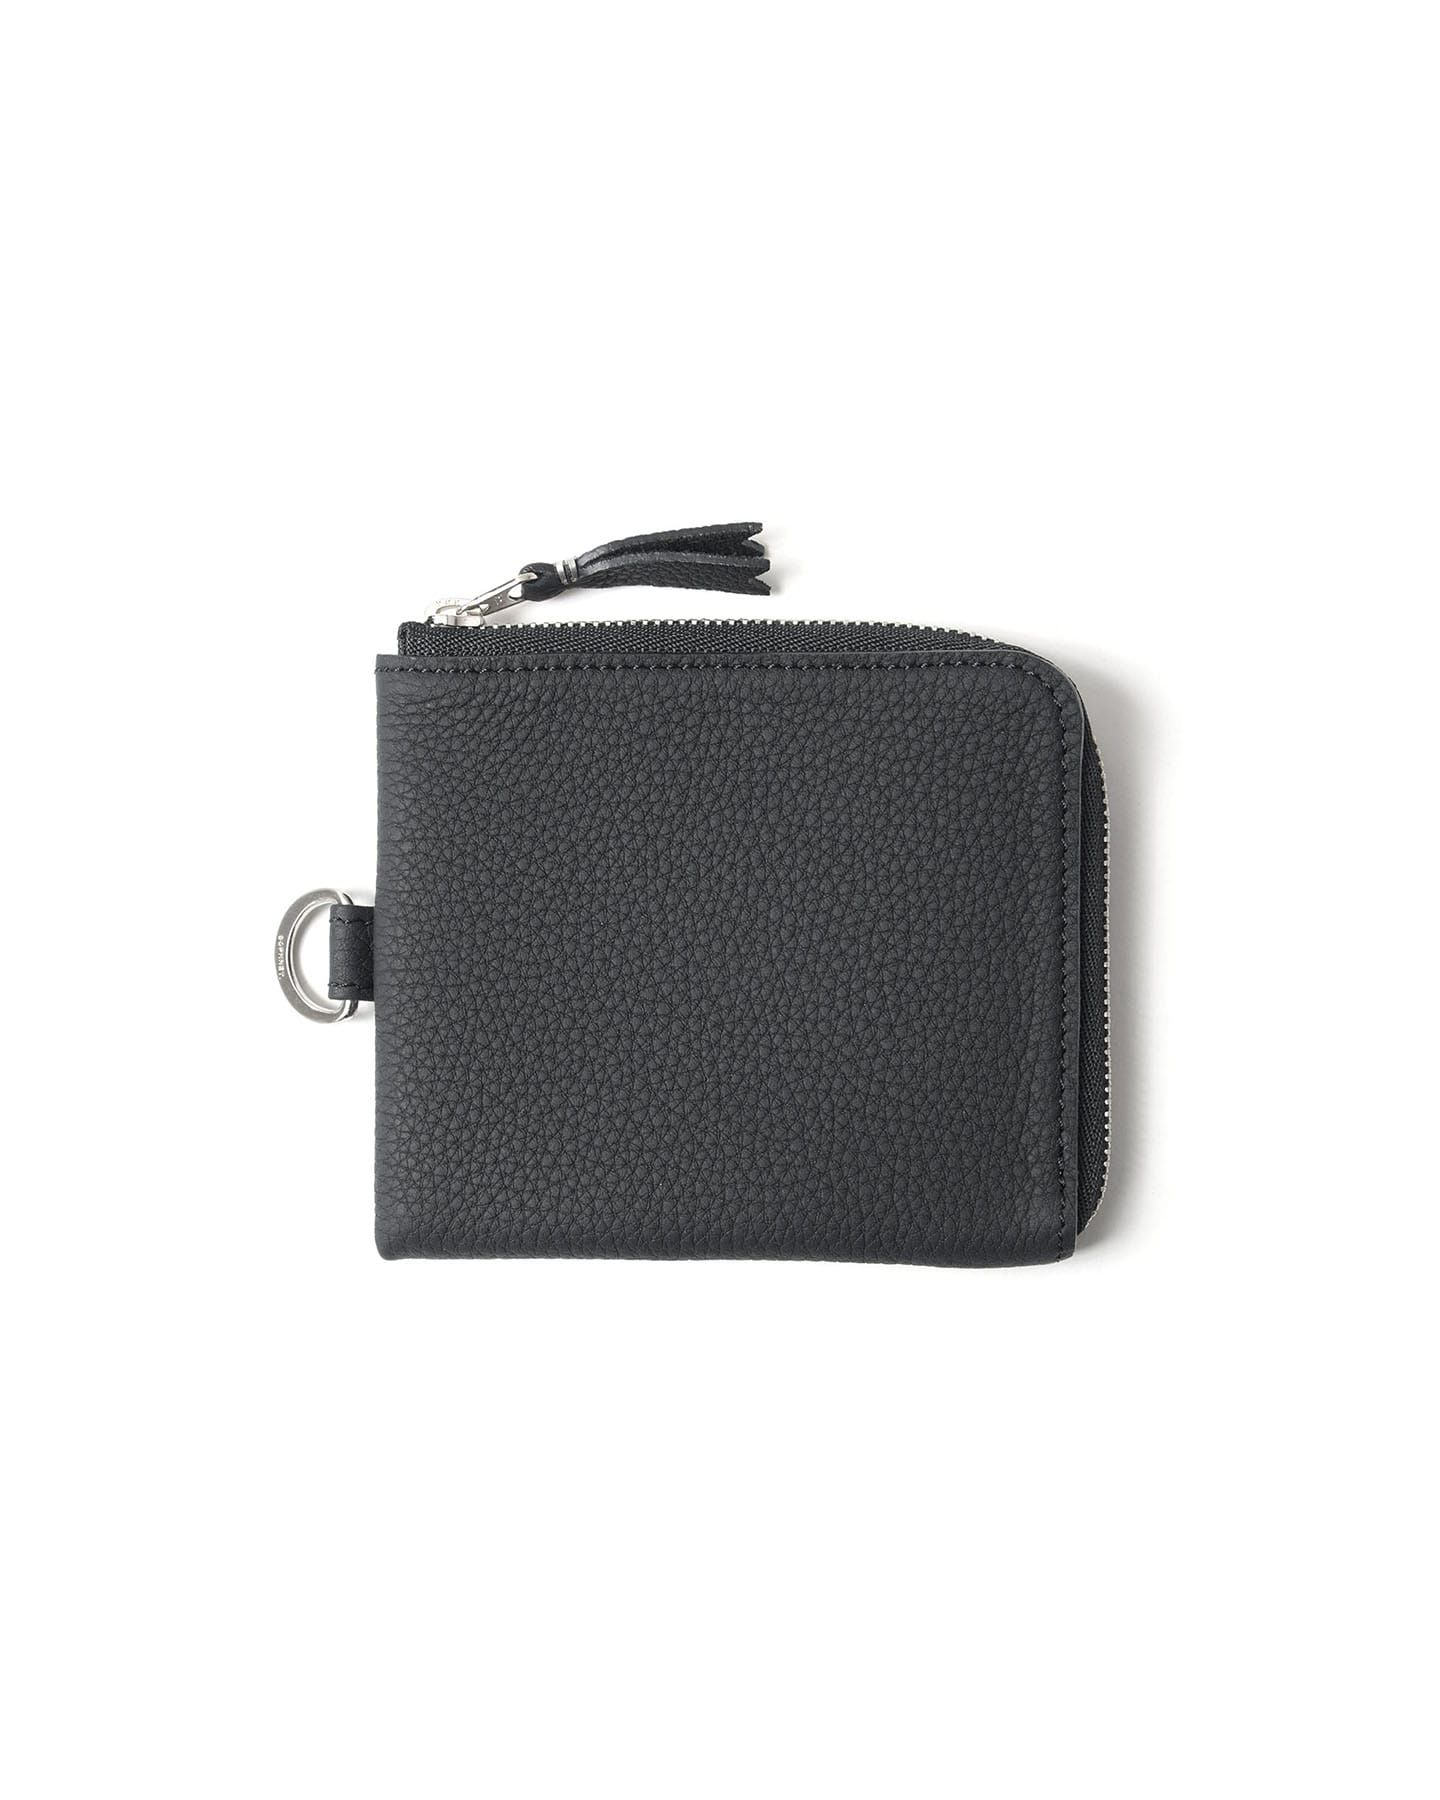 SOPH. | LEATHER COIN CASE(FREE BLACK):